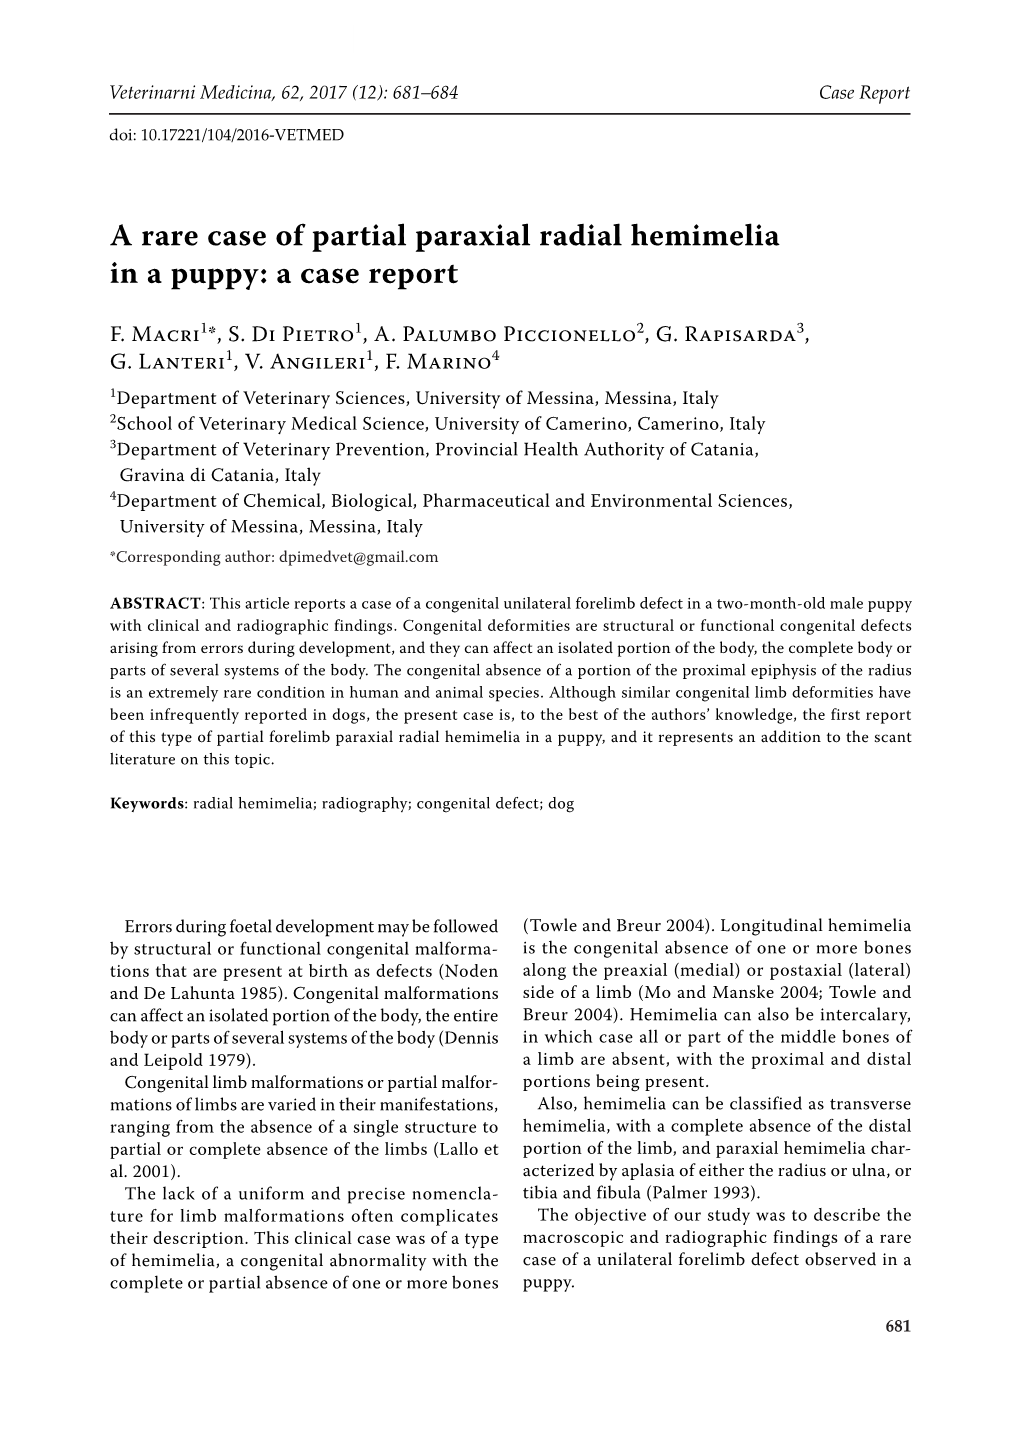 A Rare Case of Partial Paraxial Radial Hemimelia in a Puppy: a Case Report